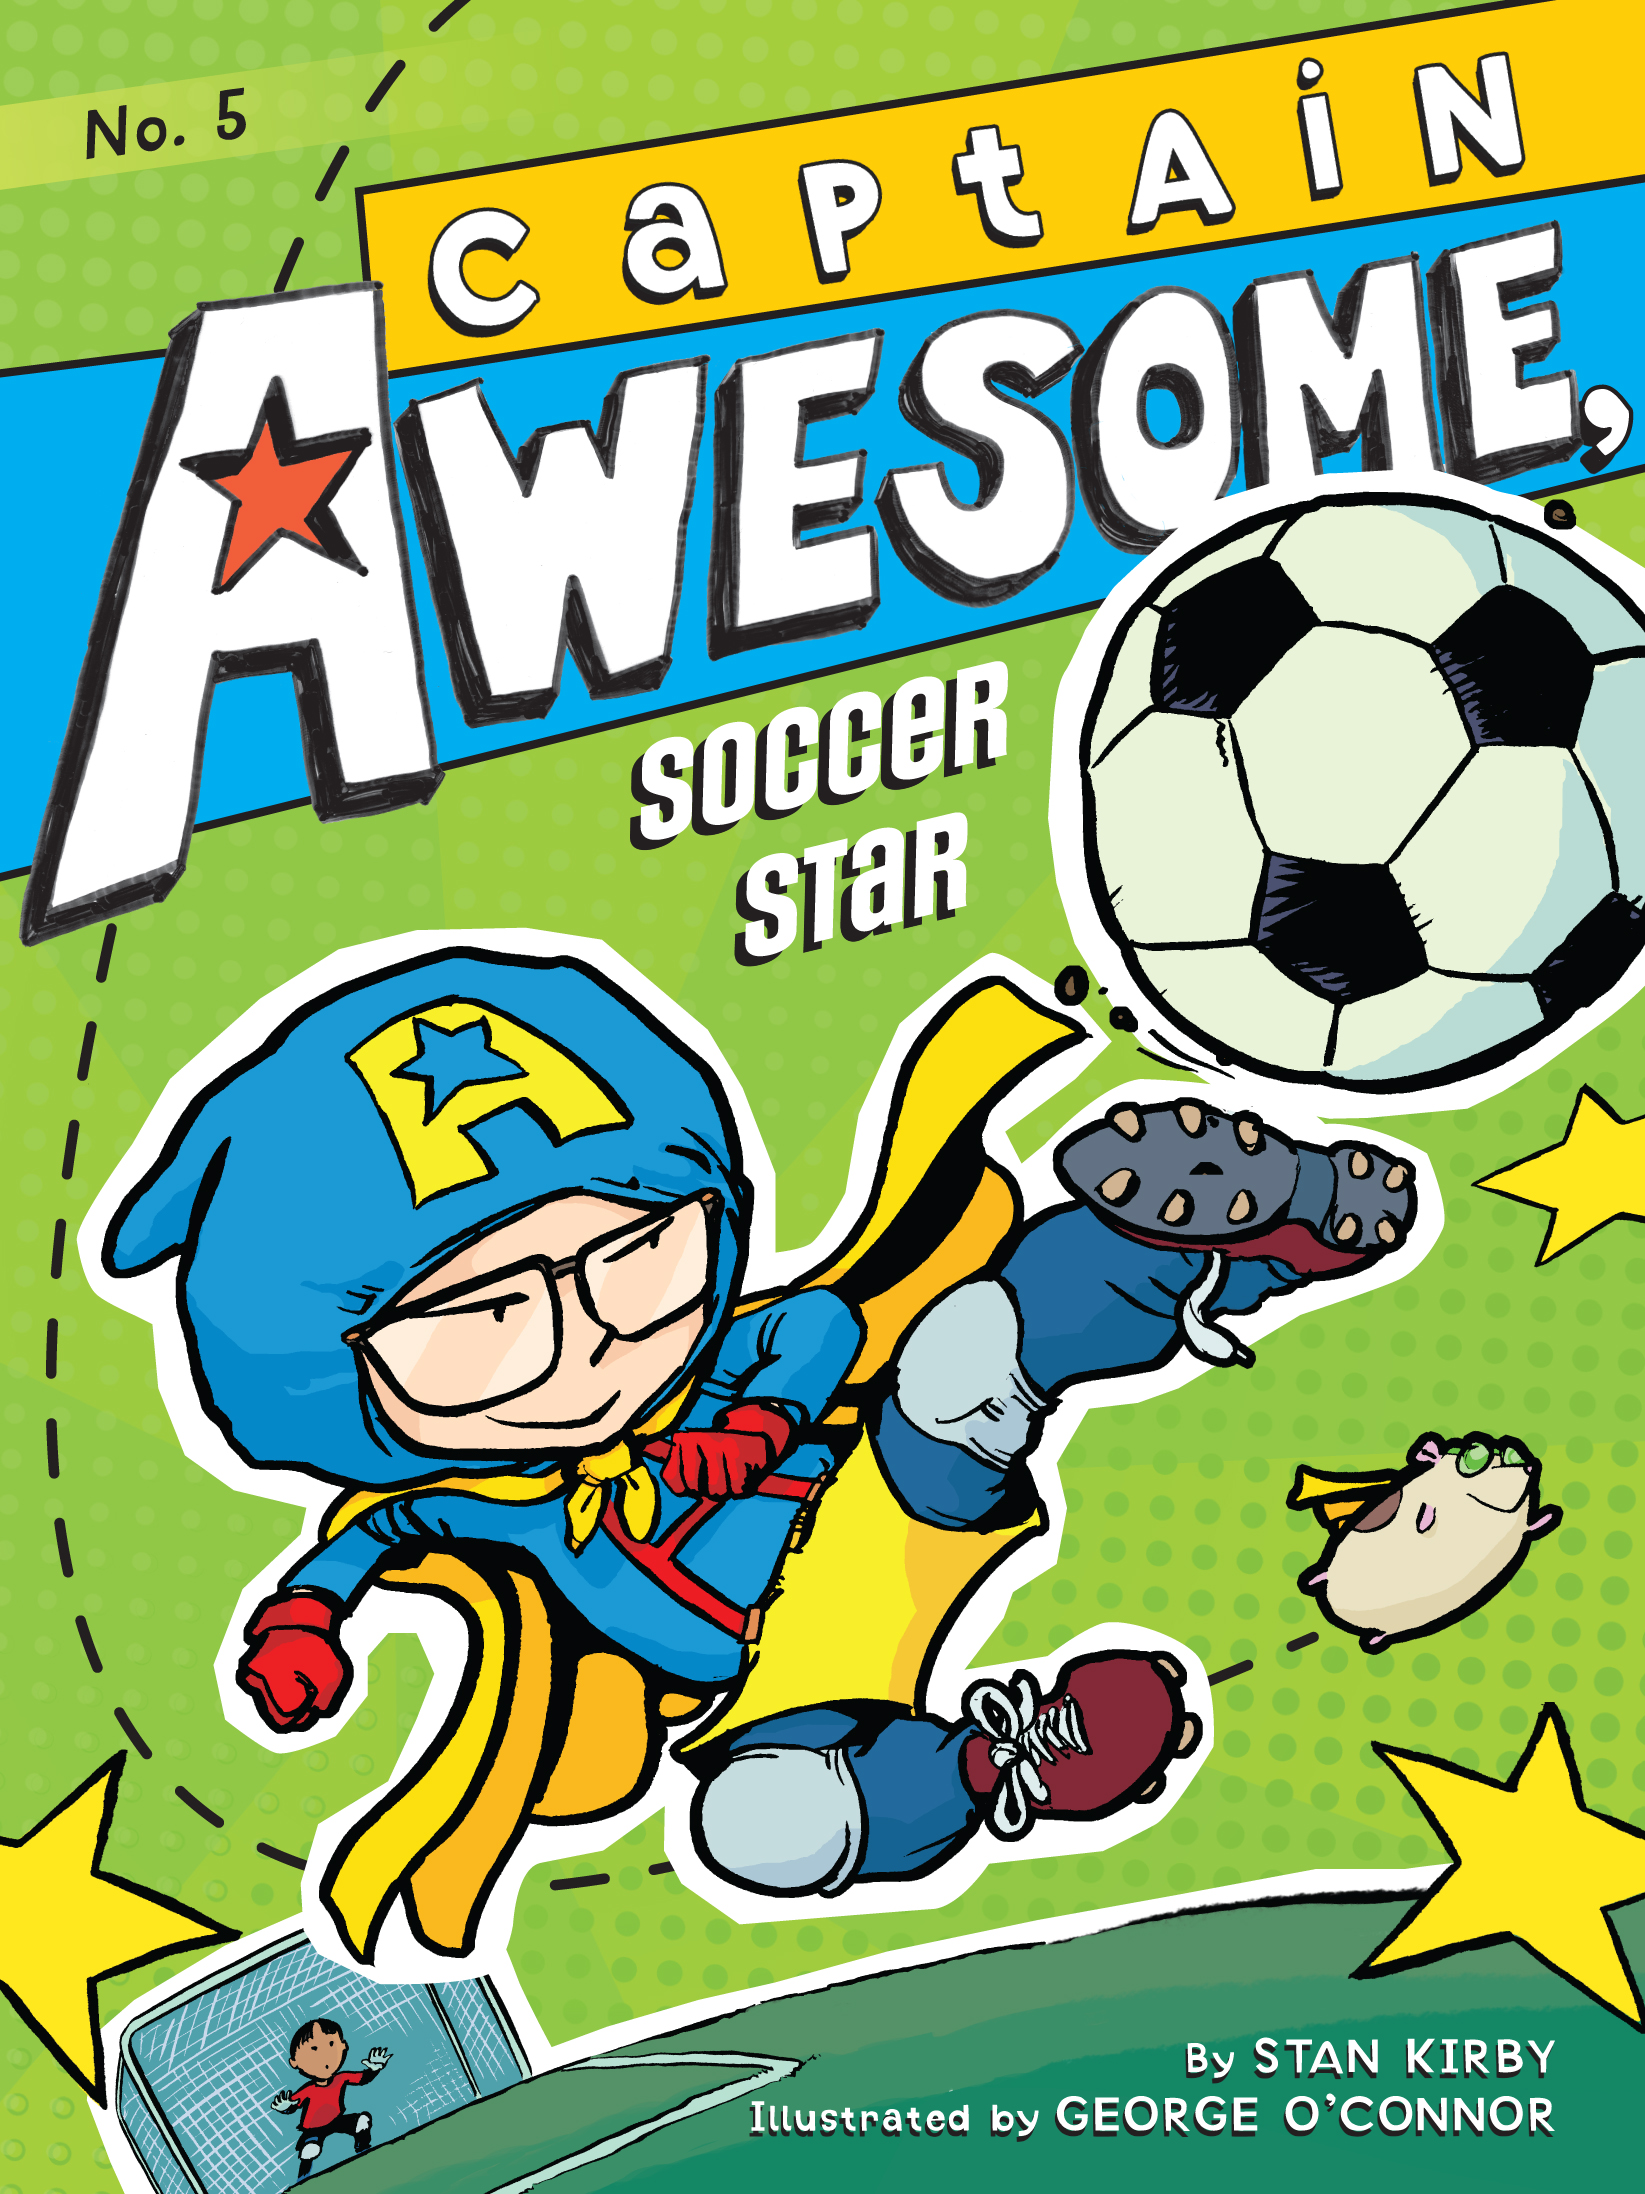 Captain Awesome, soccer star